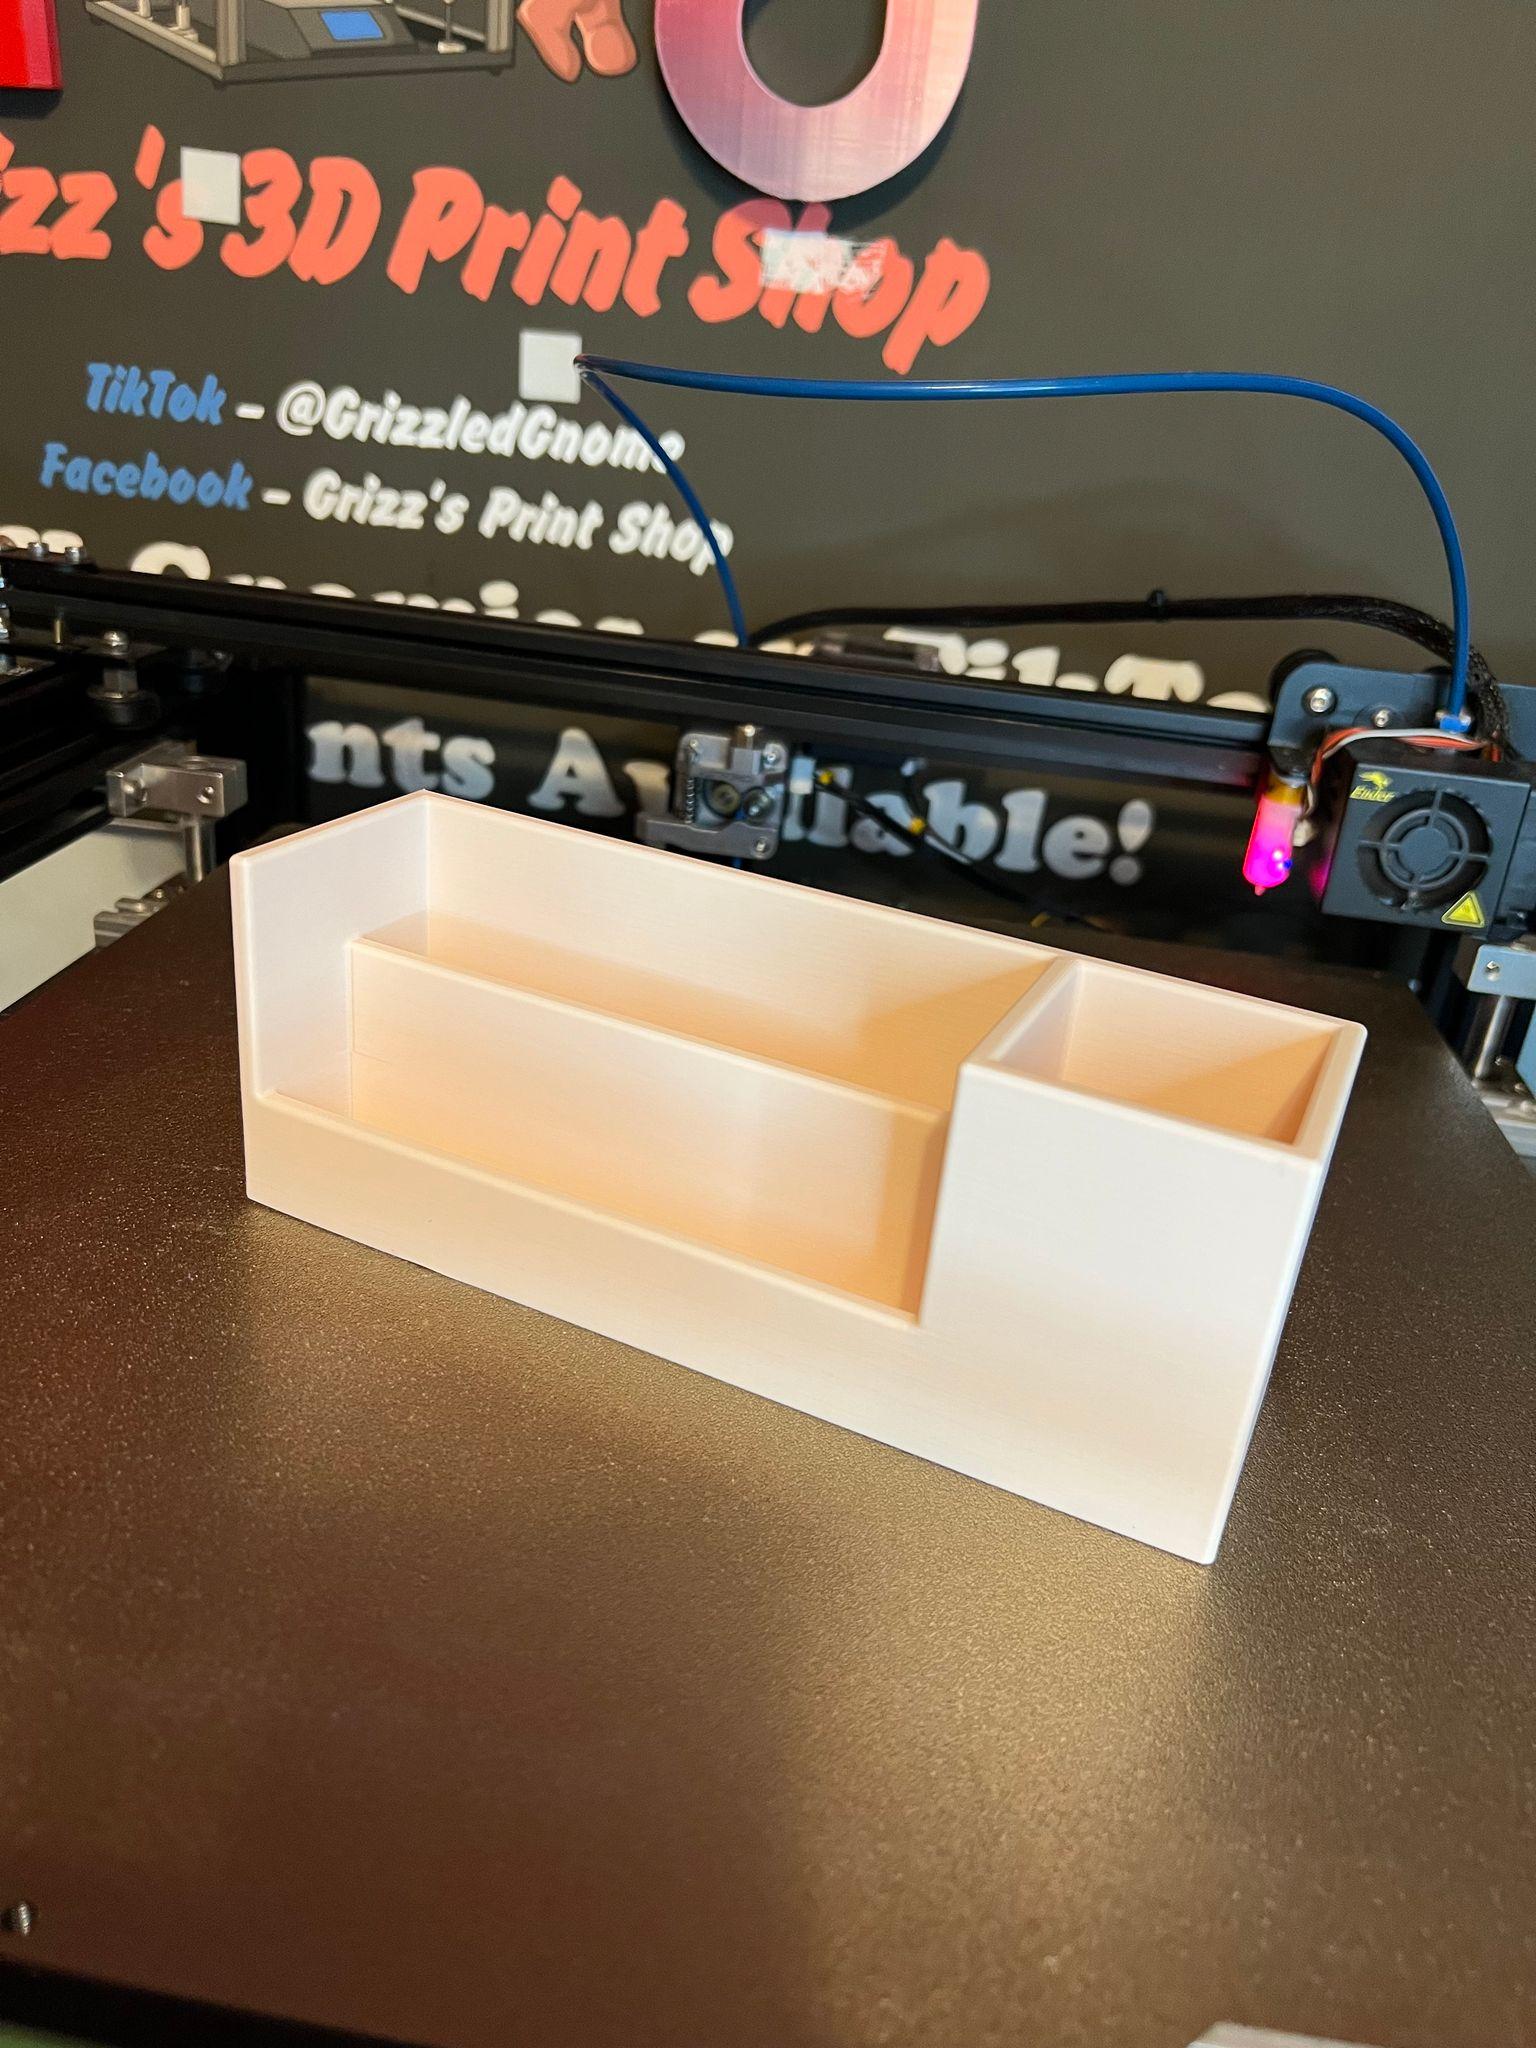 Small & simple desk organizer - Print in place 3d model